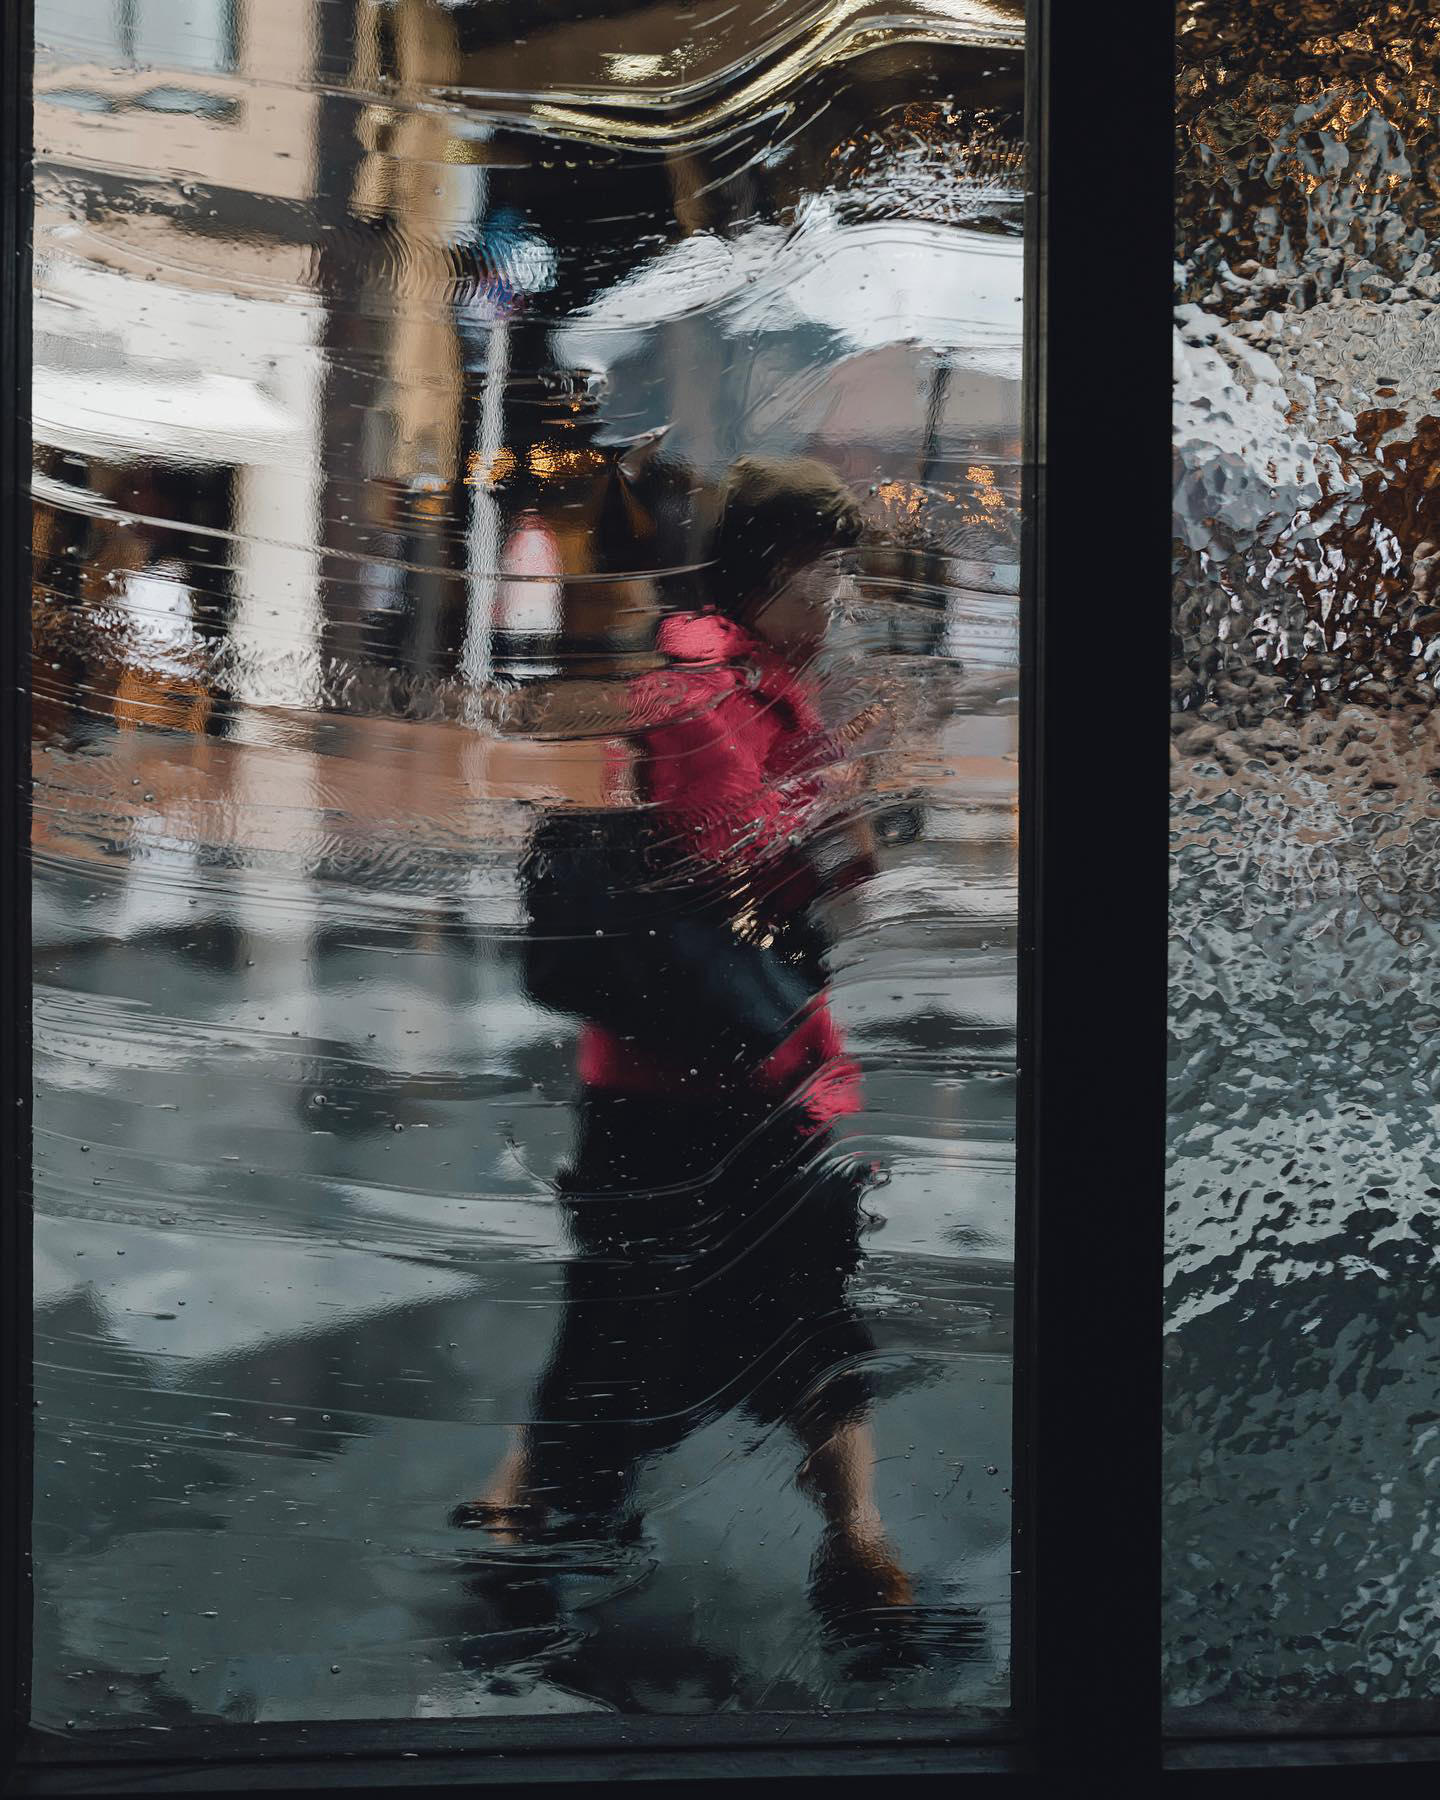 Mitsuru Wakabayashi - Picturesque through the window, with an unique atmosphere in rainy day #LeicaQ